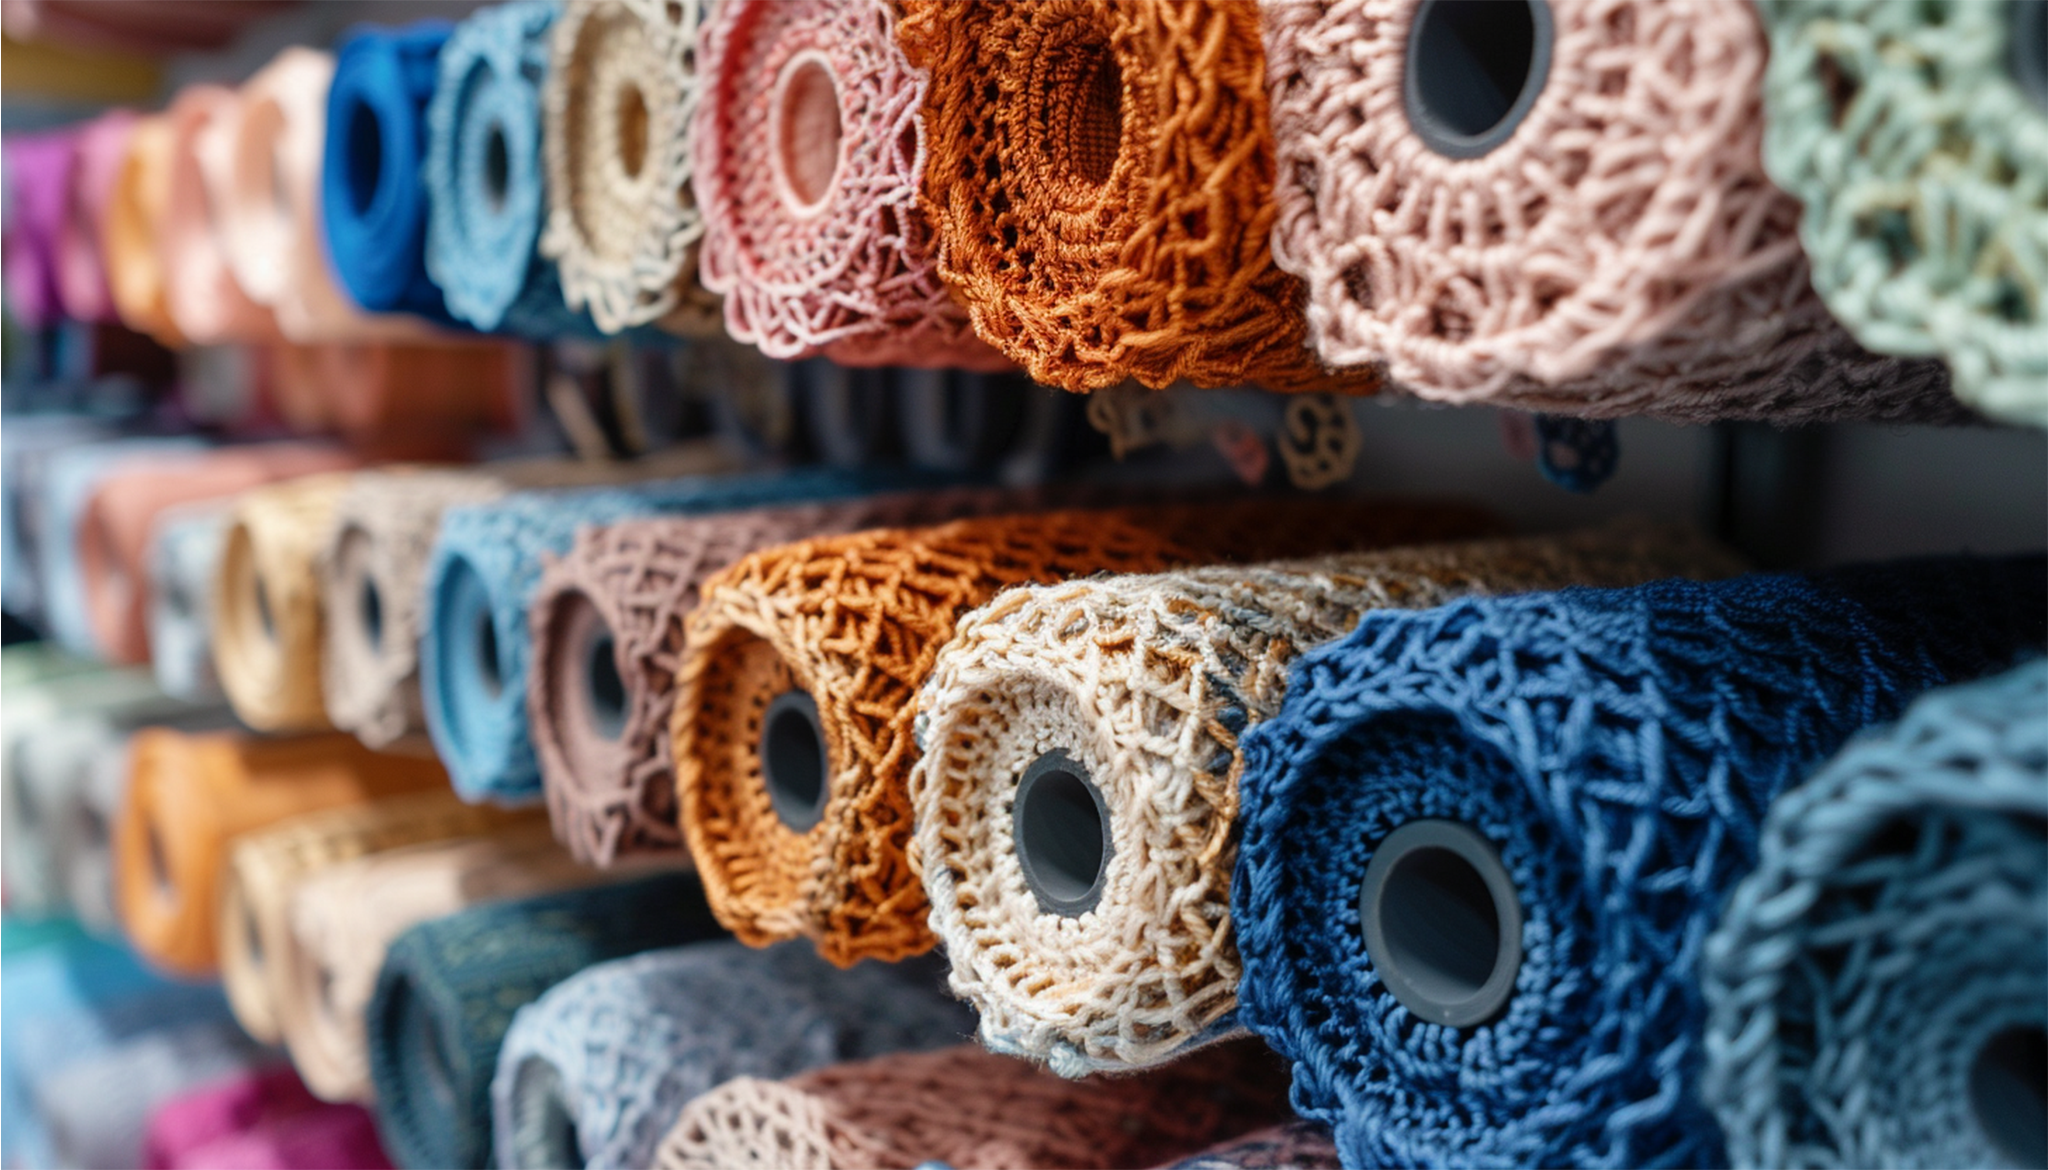 The Influx of Imitation Crochet: A Retail Trend